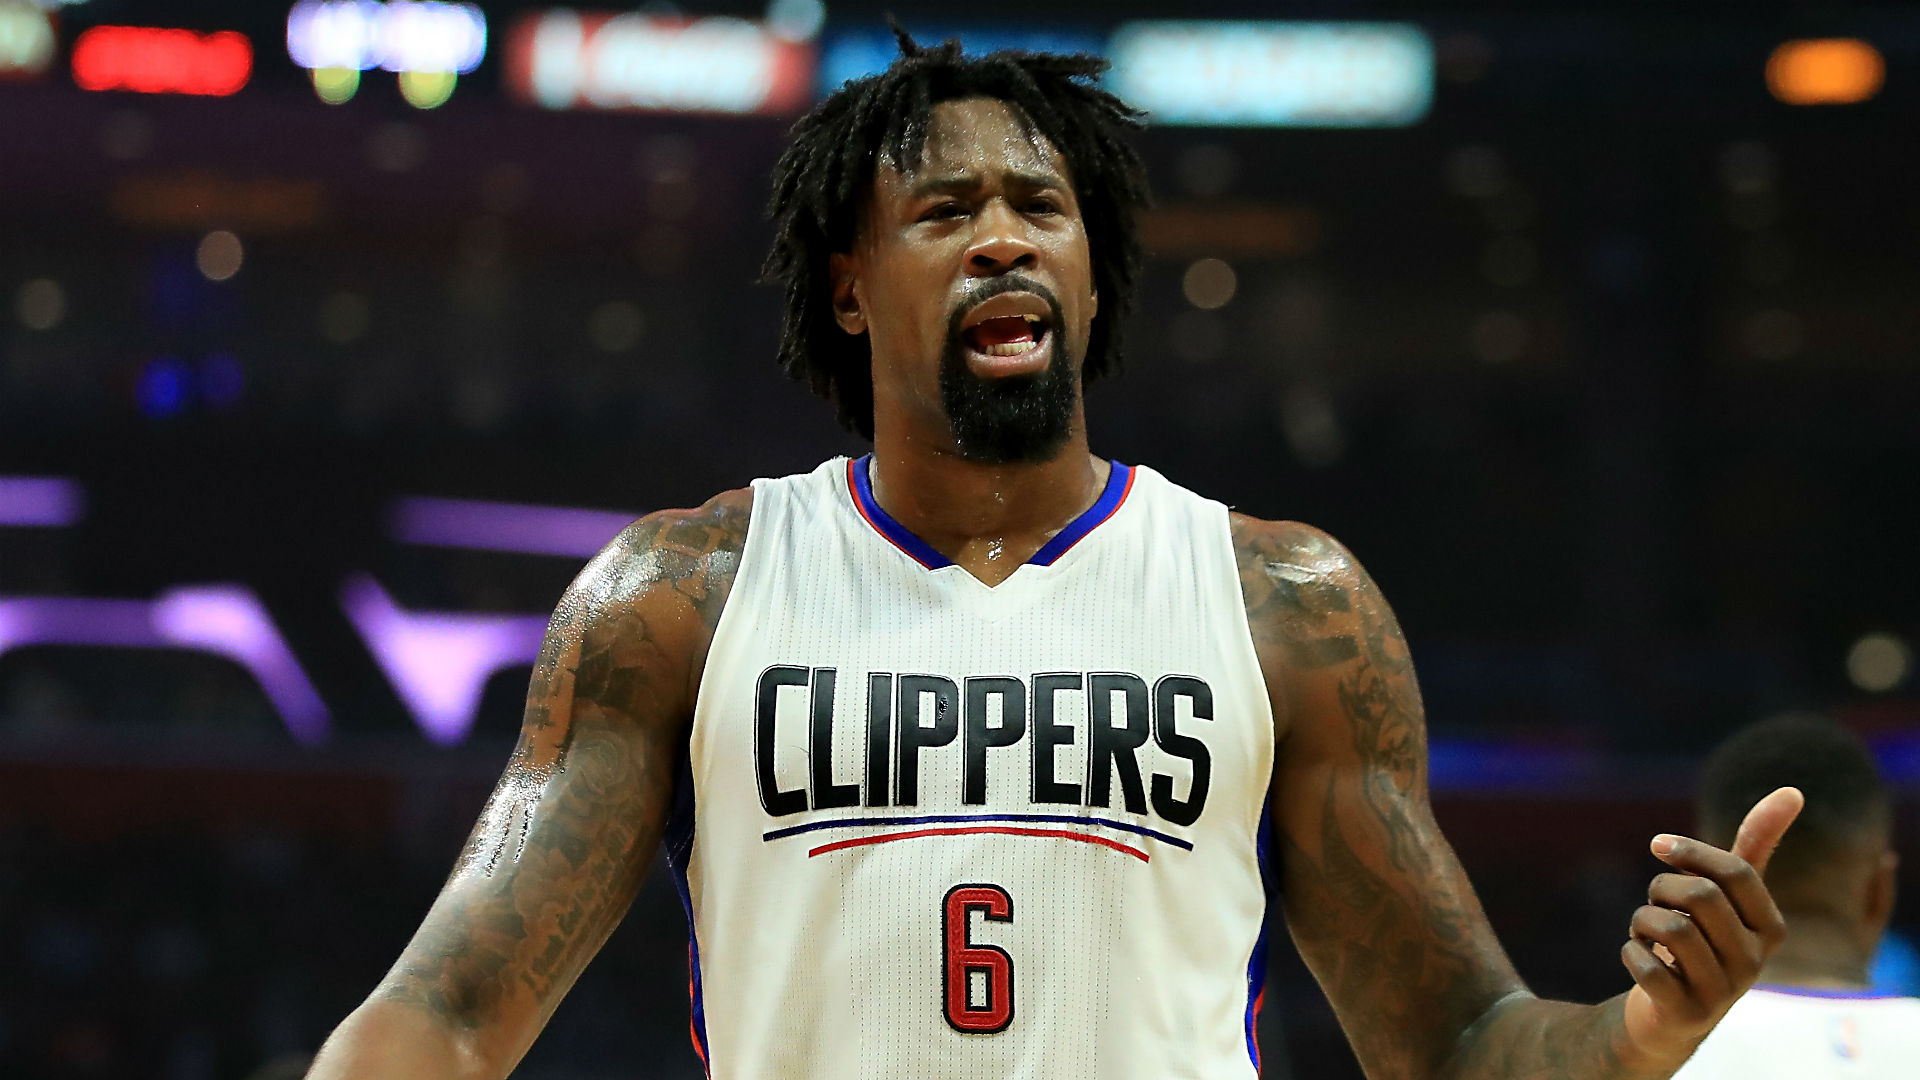 Clippers' DeAndre Jordan does the impossible, airballs backtoback